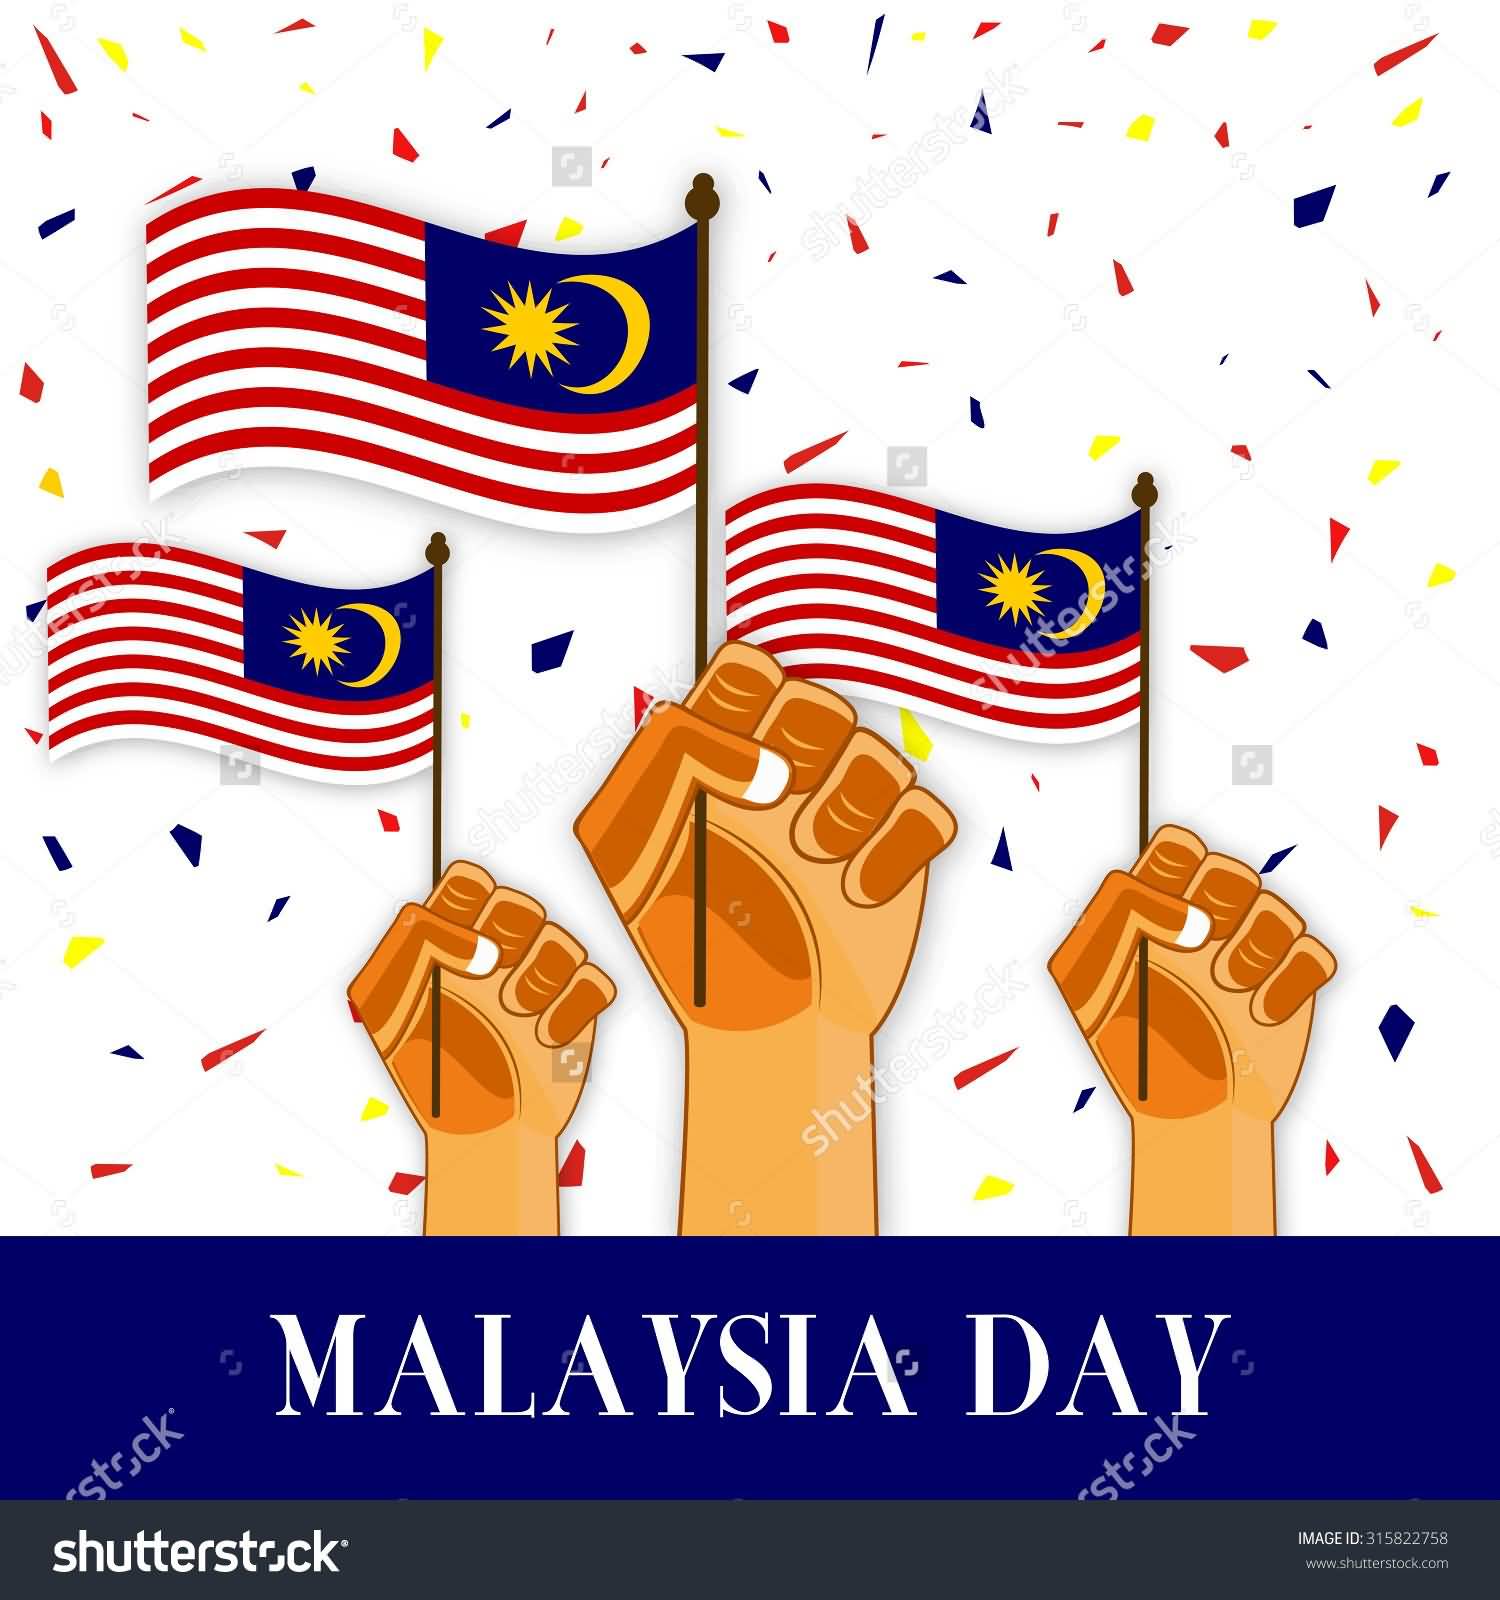 Malaysia Day Wishes With Flags In Hands Illustration